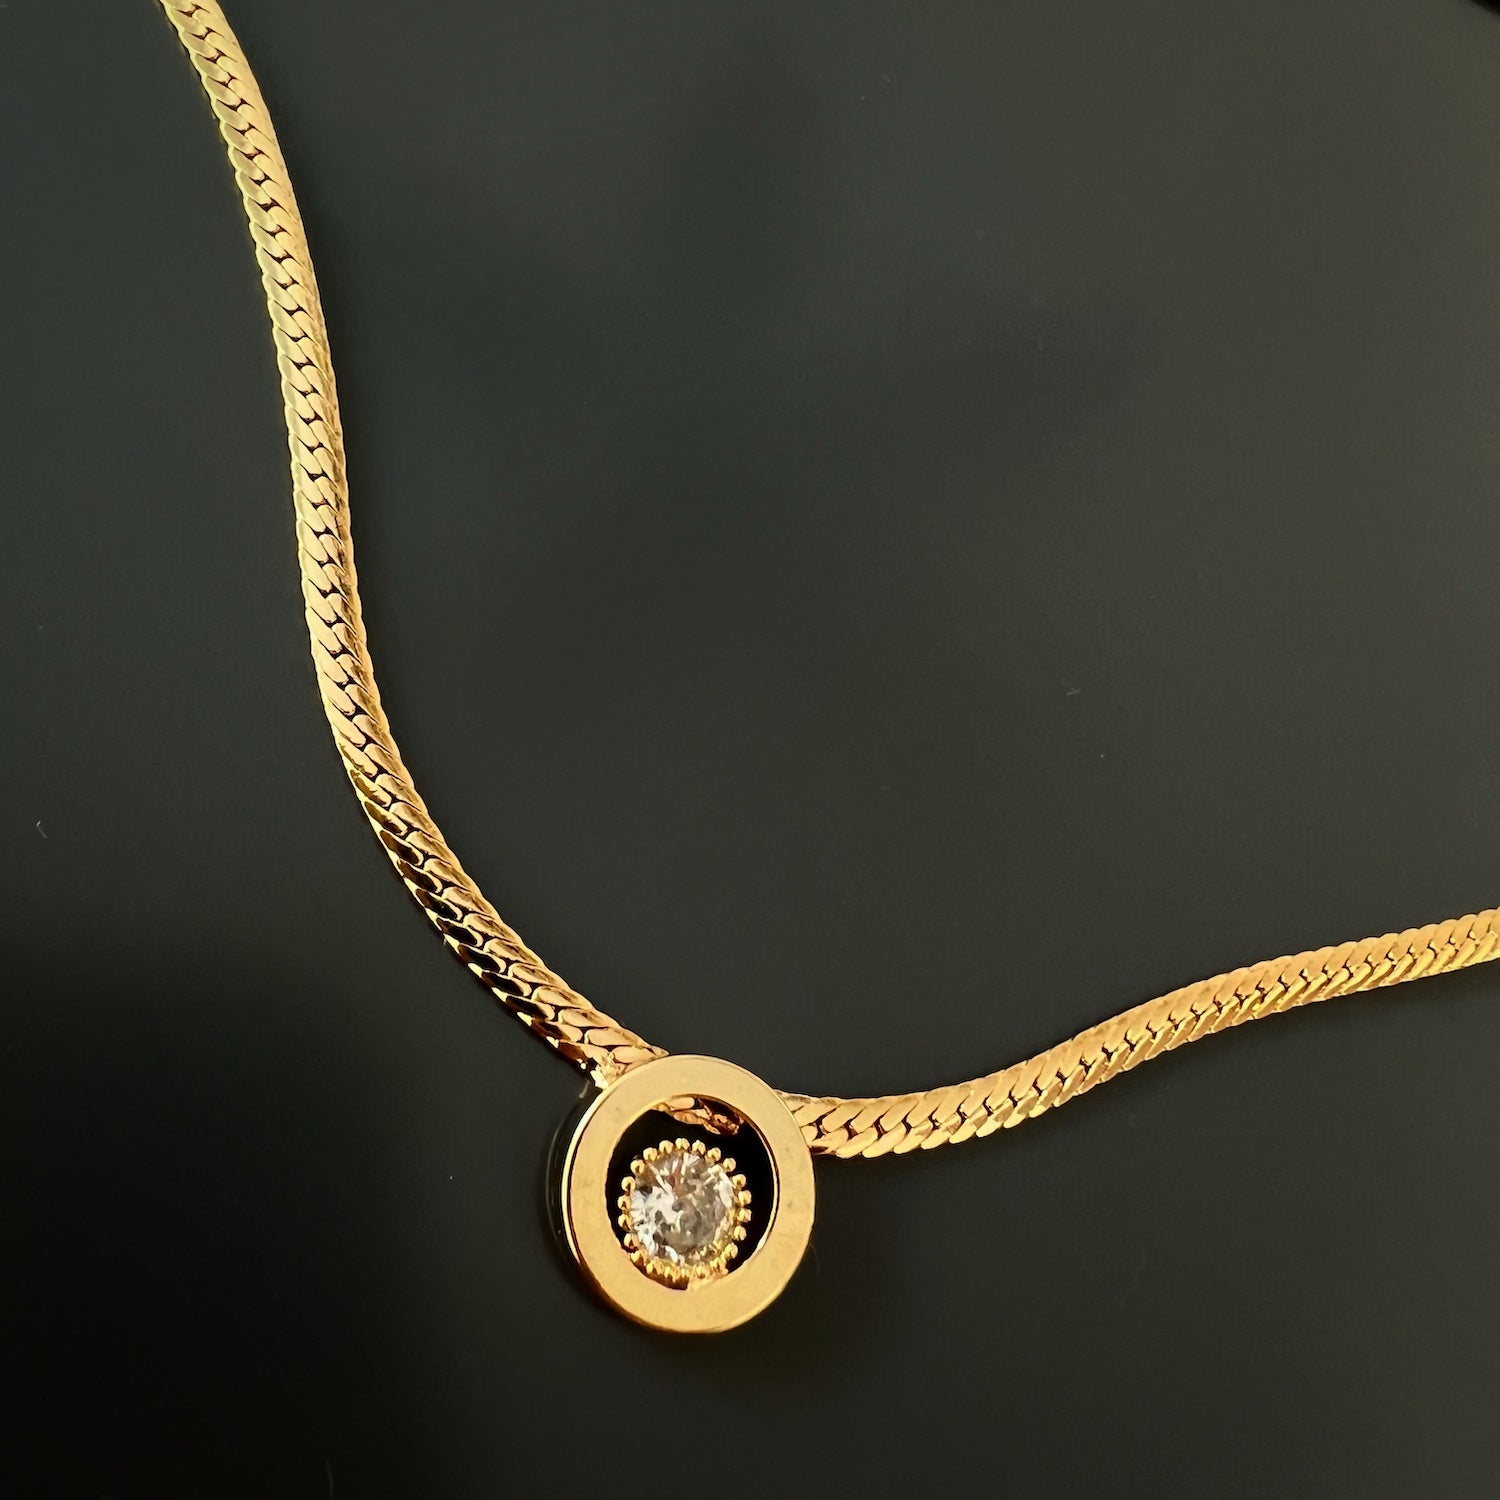 The Diamond and Gold Choker Necklace capturing its elegance and sophistication.